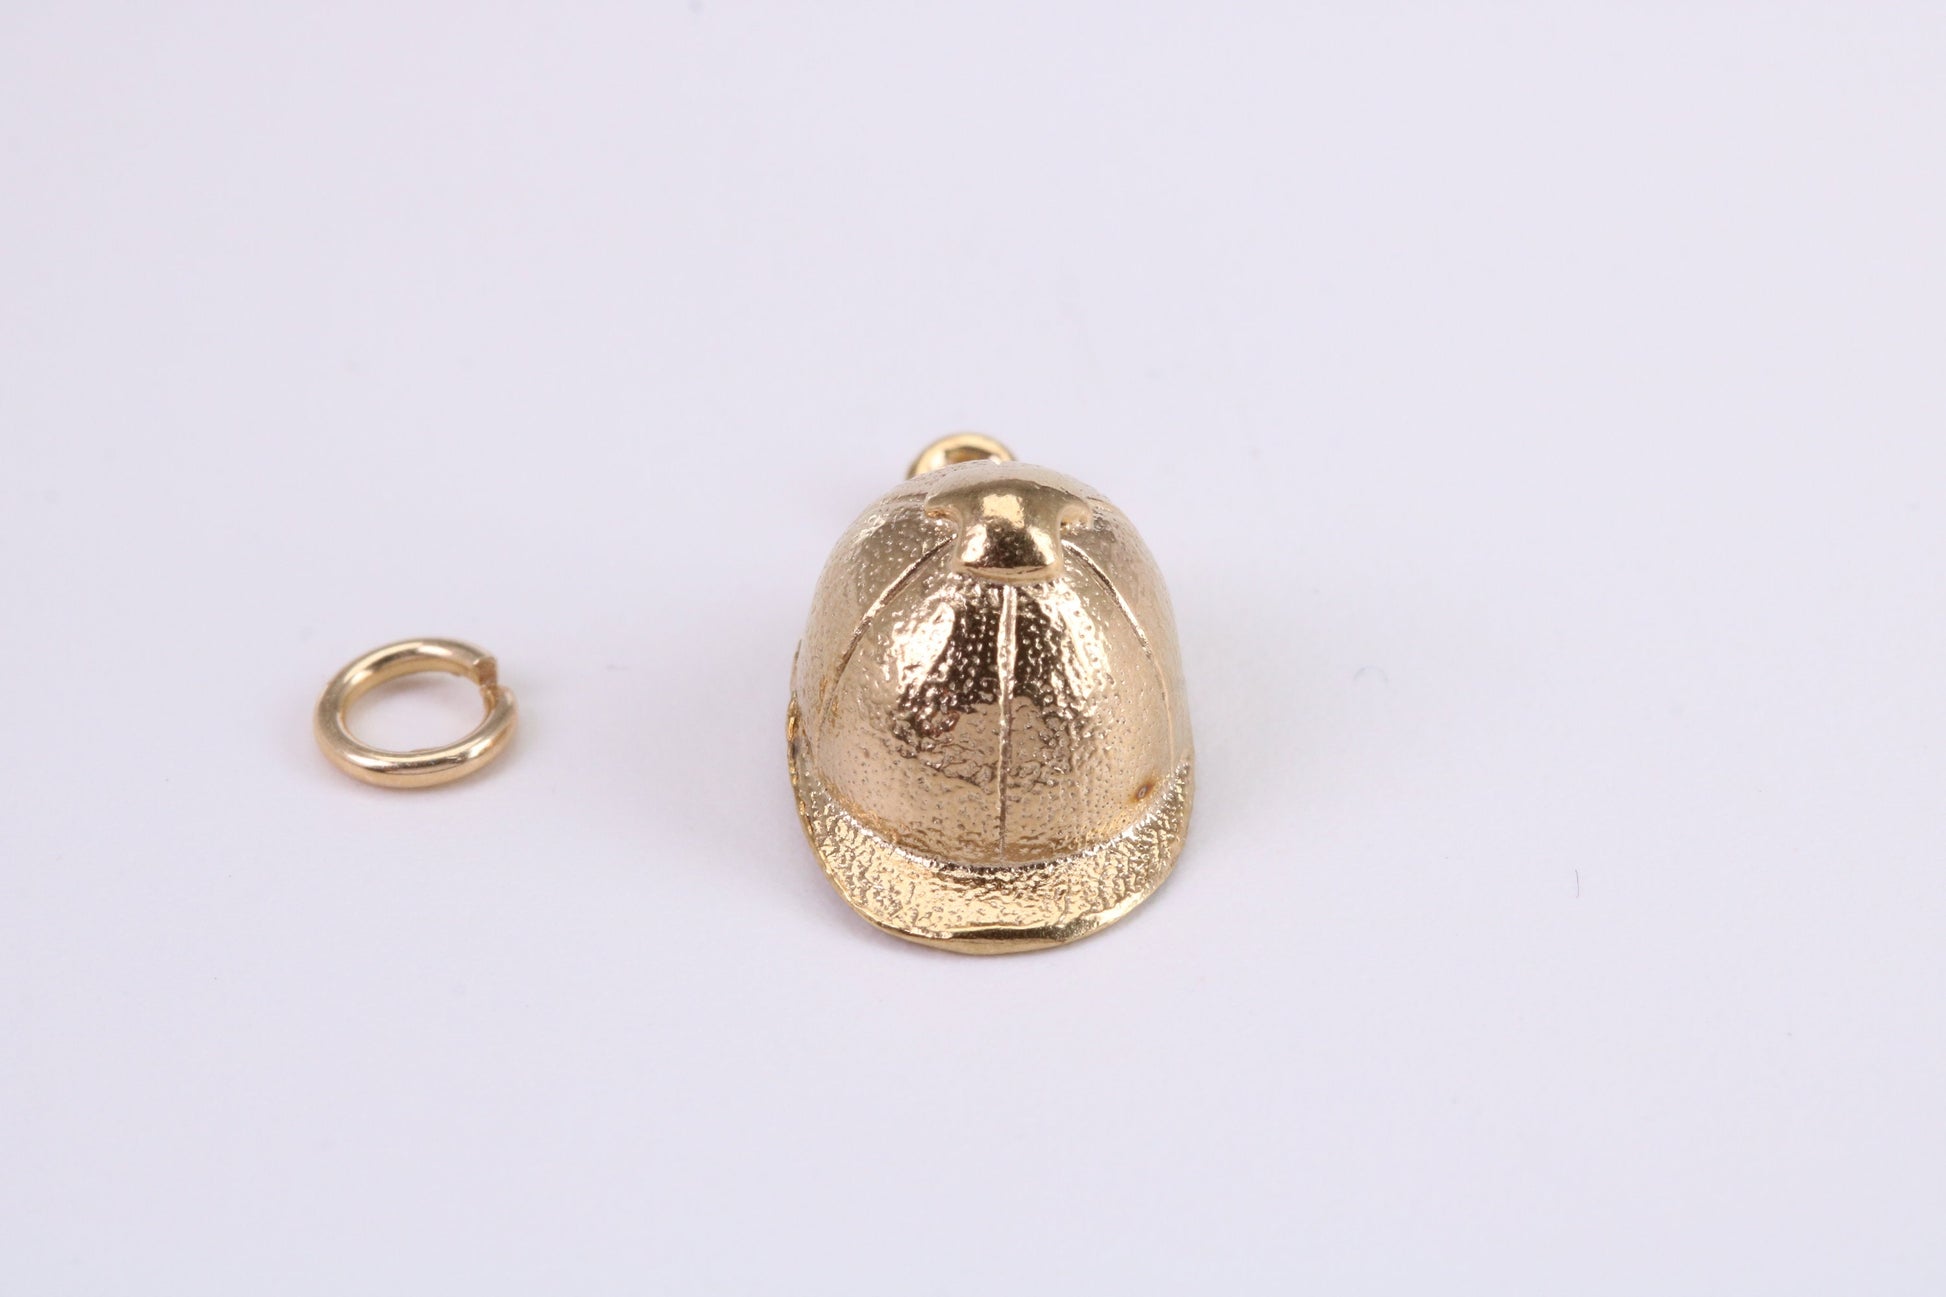 Jockey Hat charm, Traditional Charm, Made from Solid Yellow Gold, British Hallmarked, Complete with Attachment Link